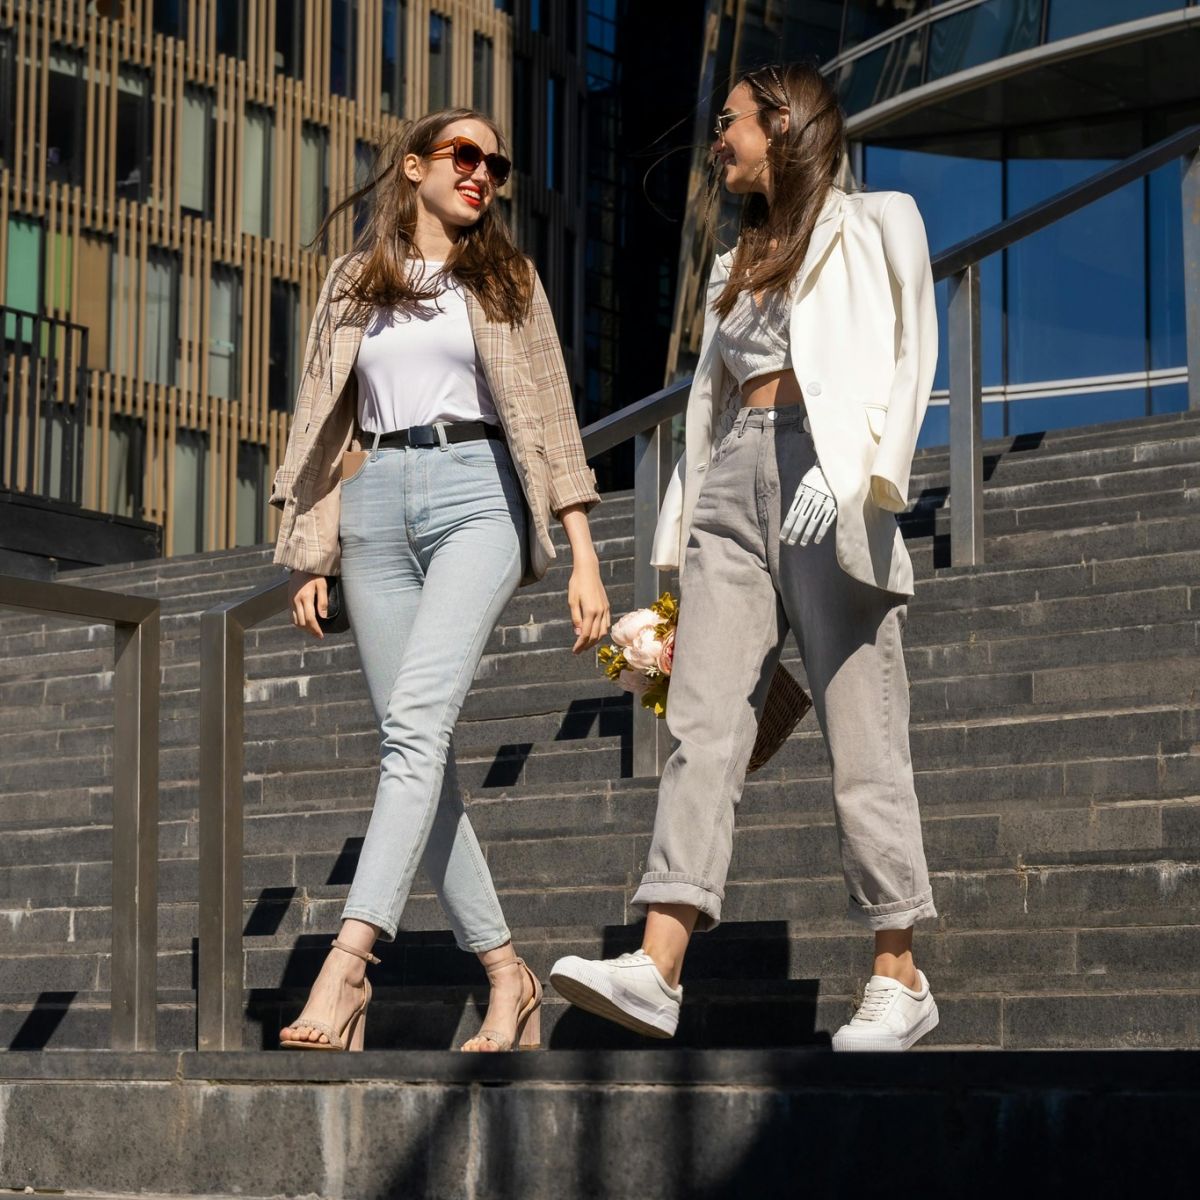 Young women in business casual attire walking down city stairway